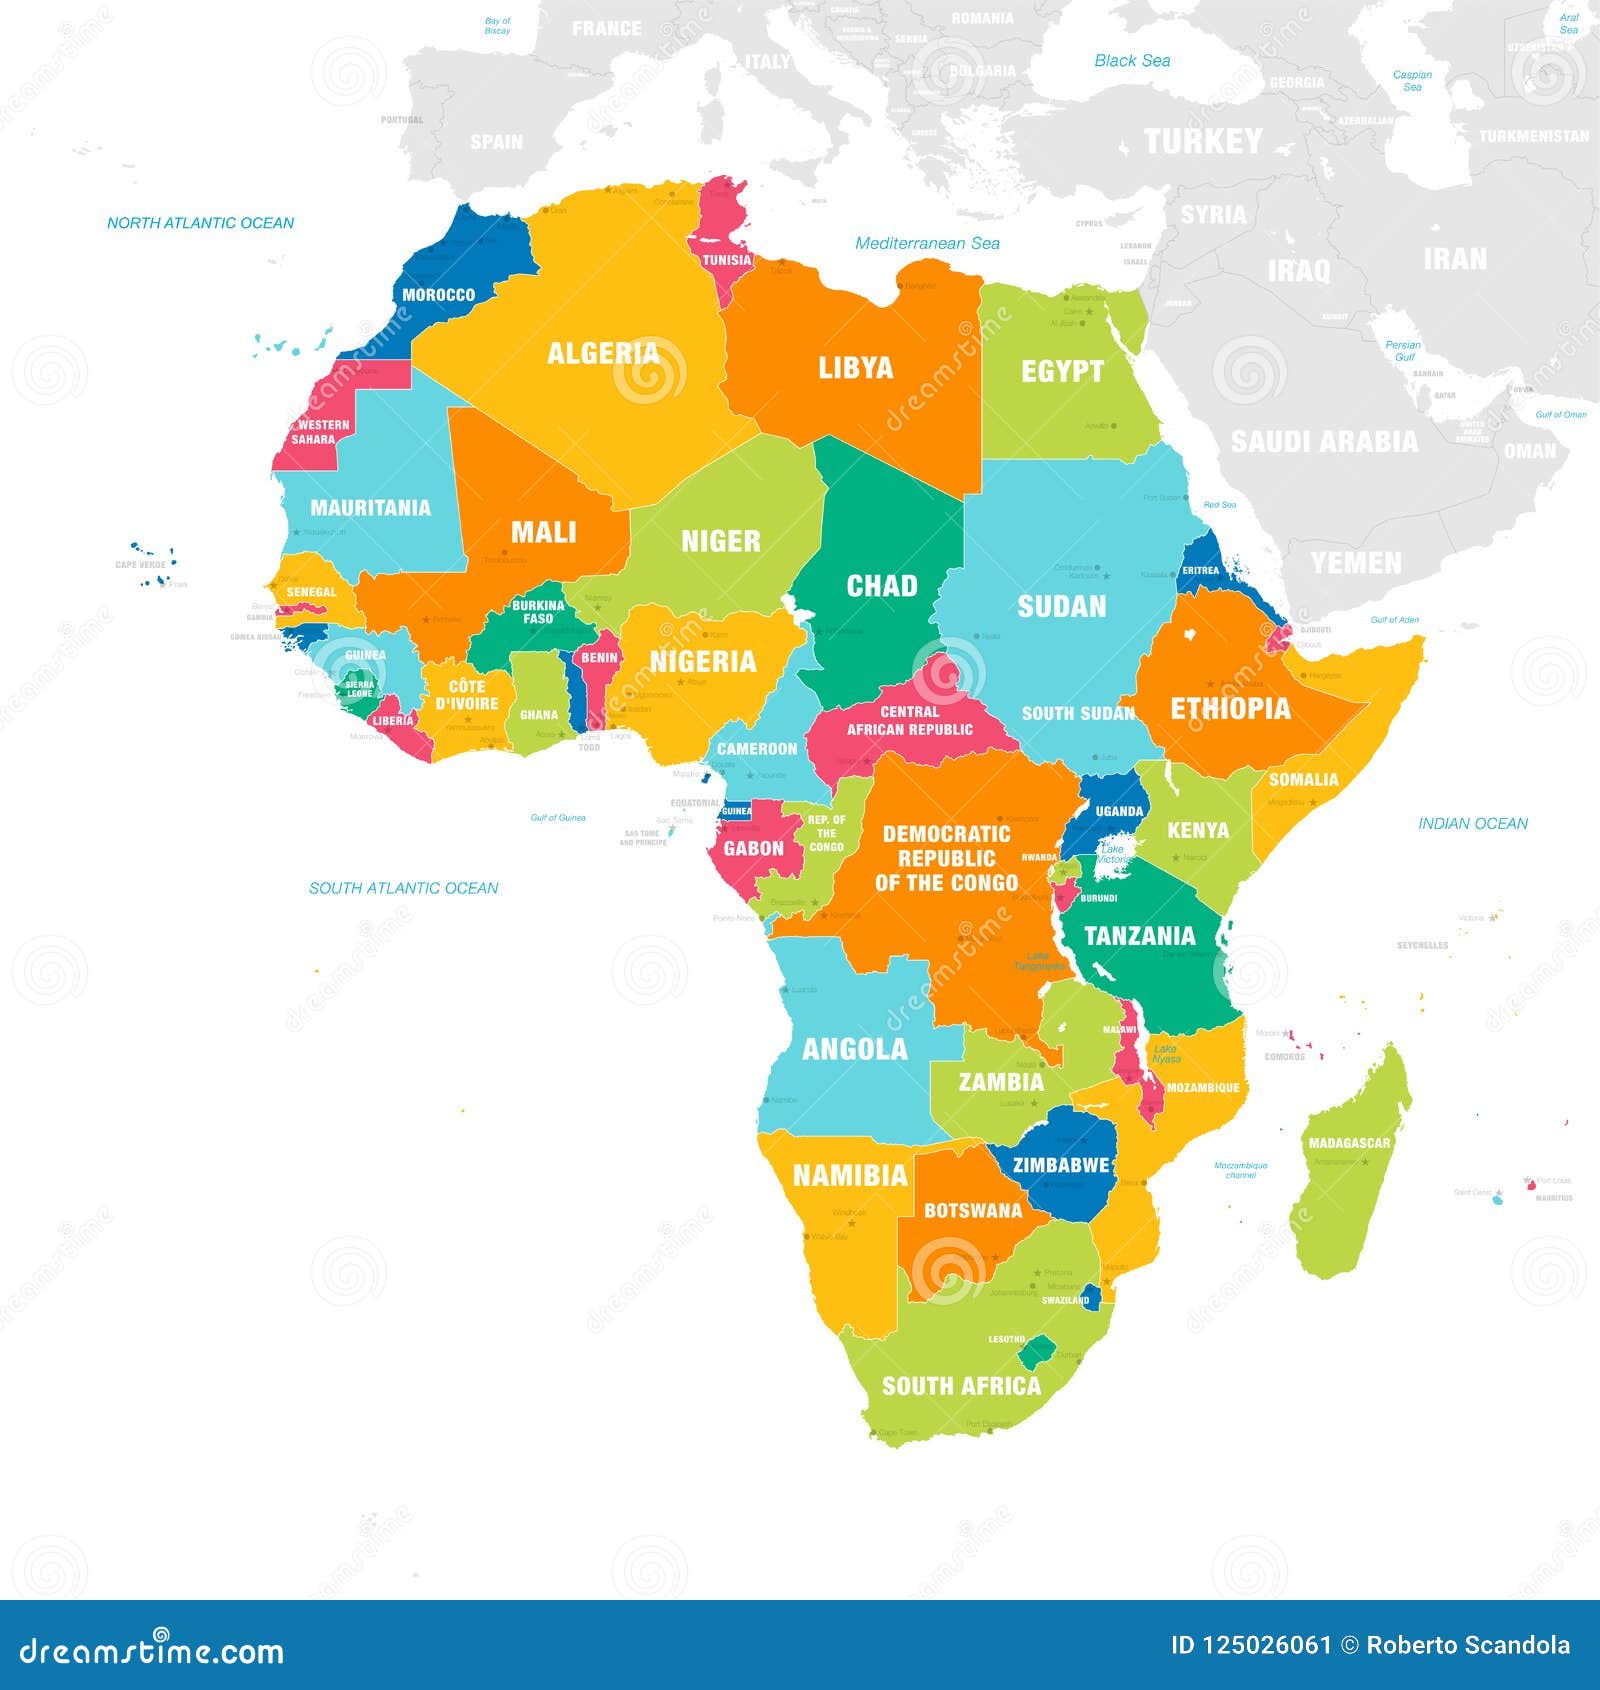 Colorful Vector Map Africa Vector Map Africa Continent Countries Capitals Main Cities Seas Islands Names 125026061 